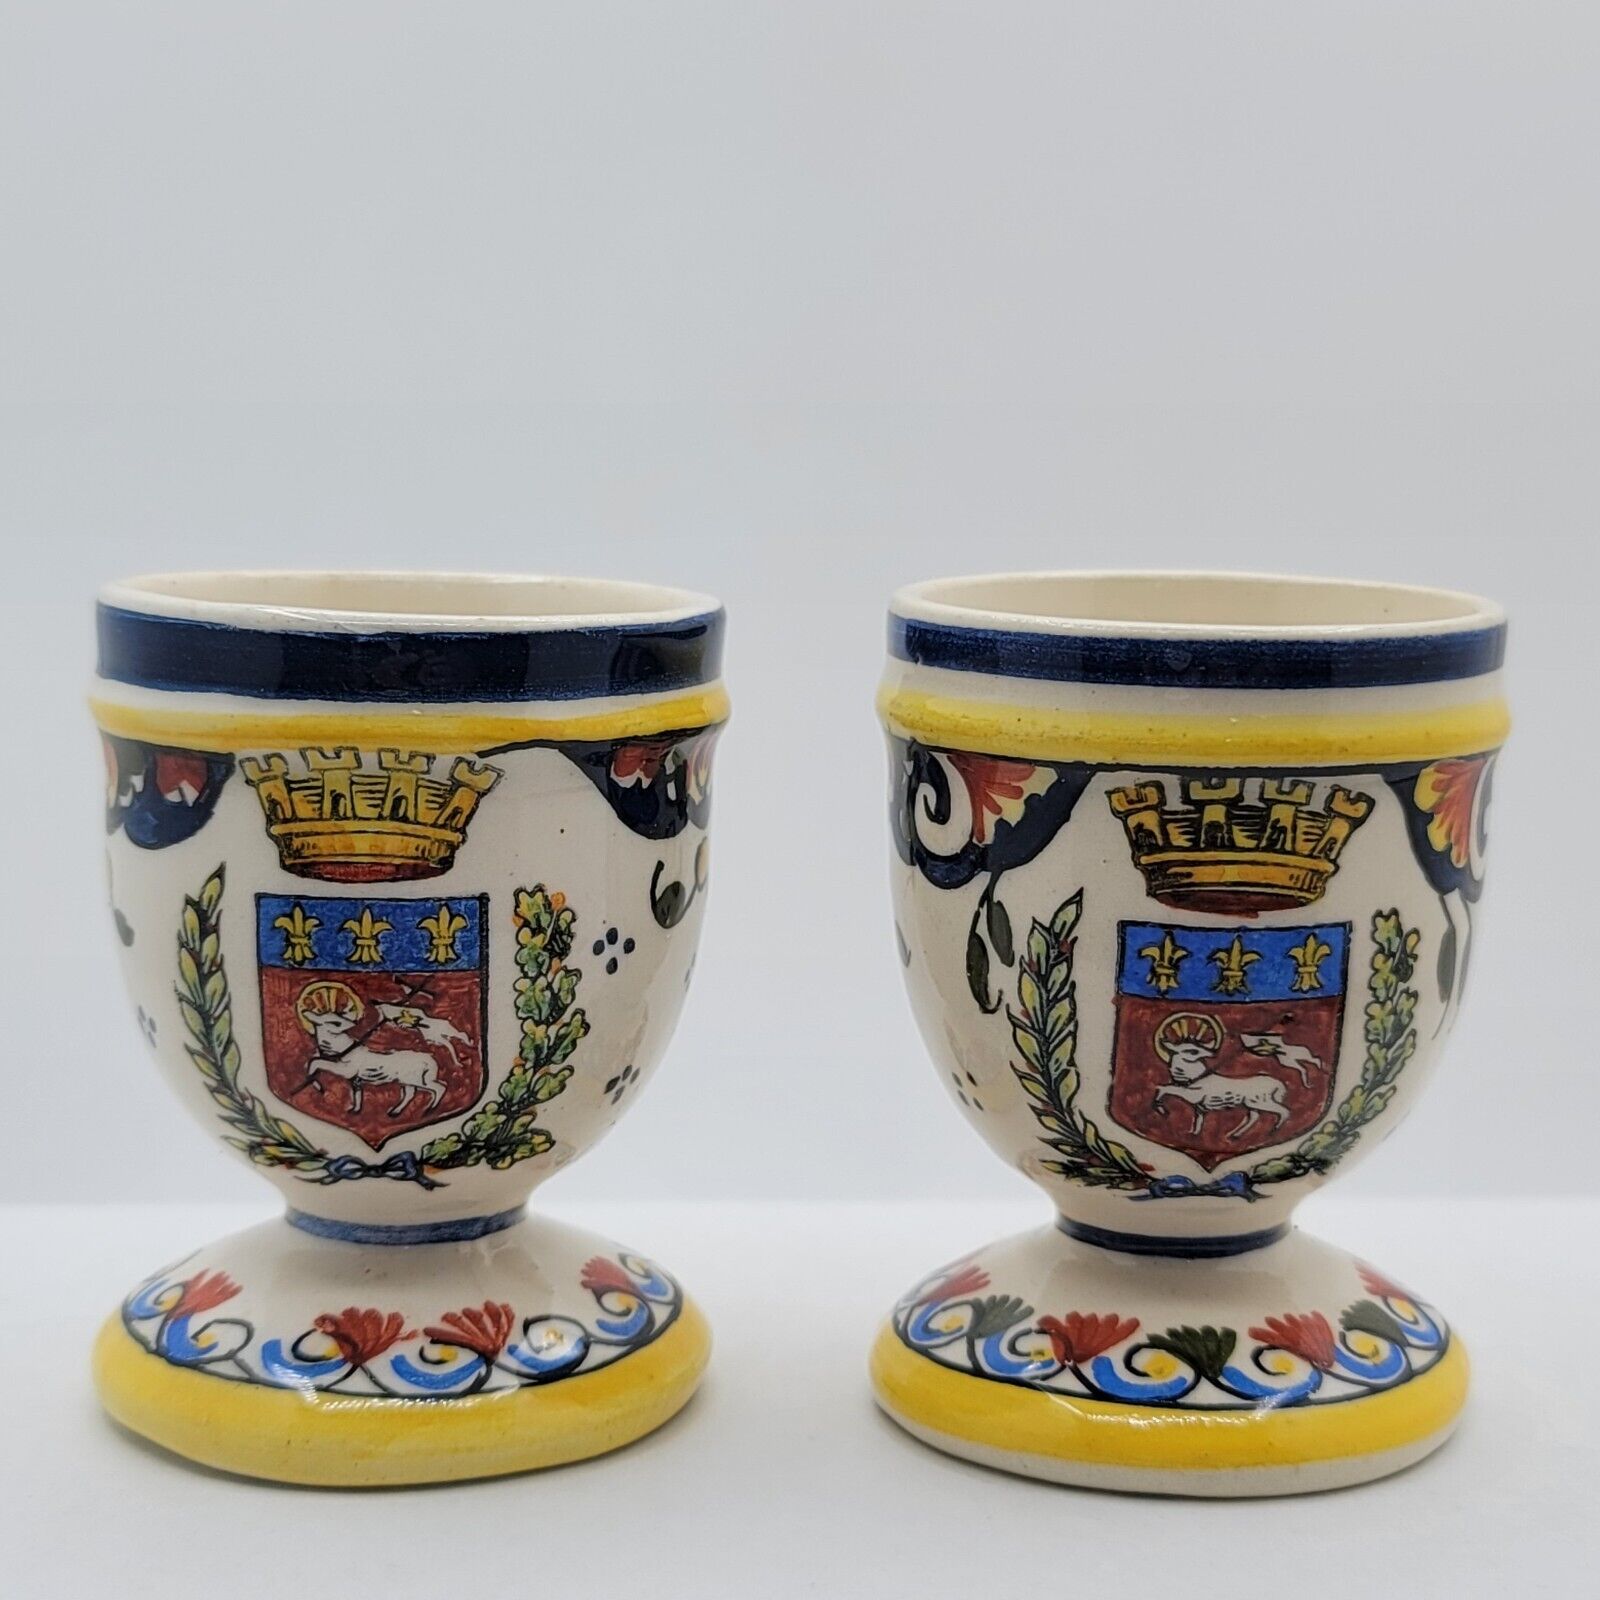 2-Vtg 1980 French Rouen Earthenware Egg Cups-Hand Painted Crest Faience Desvres